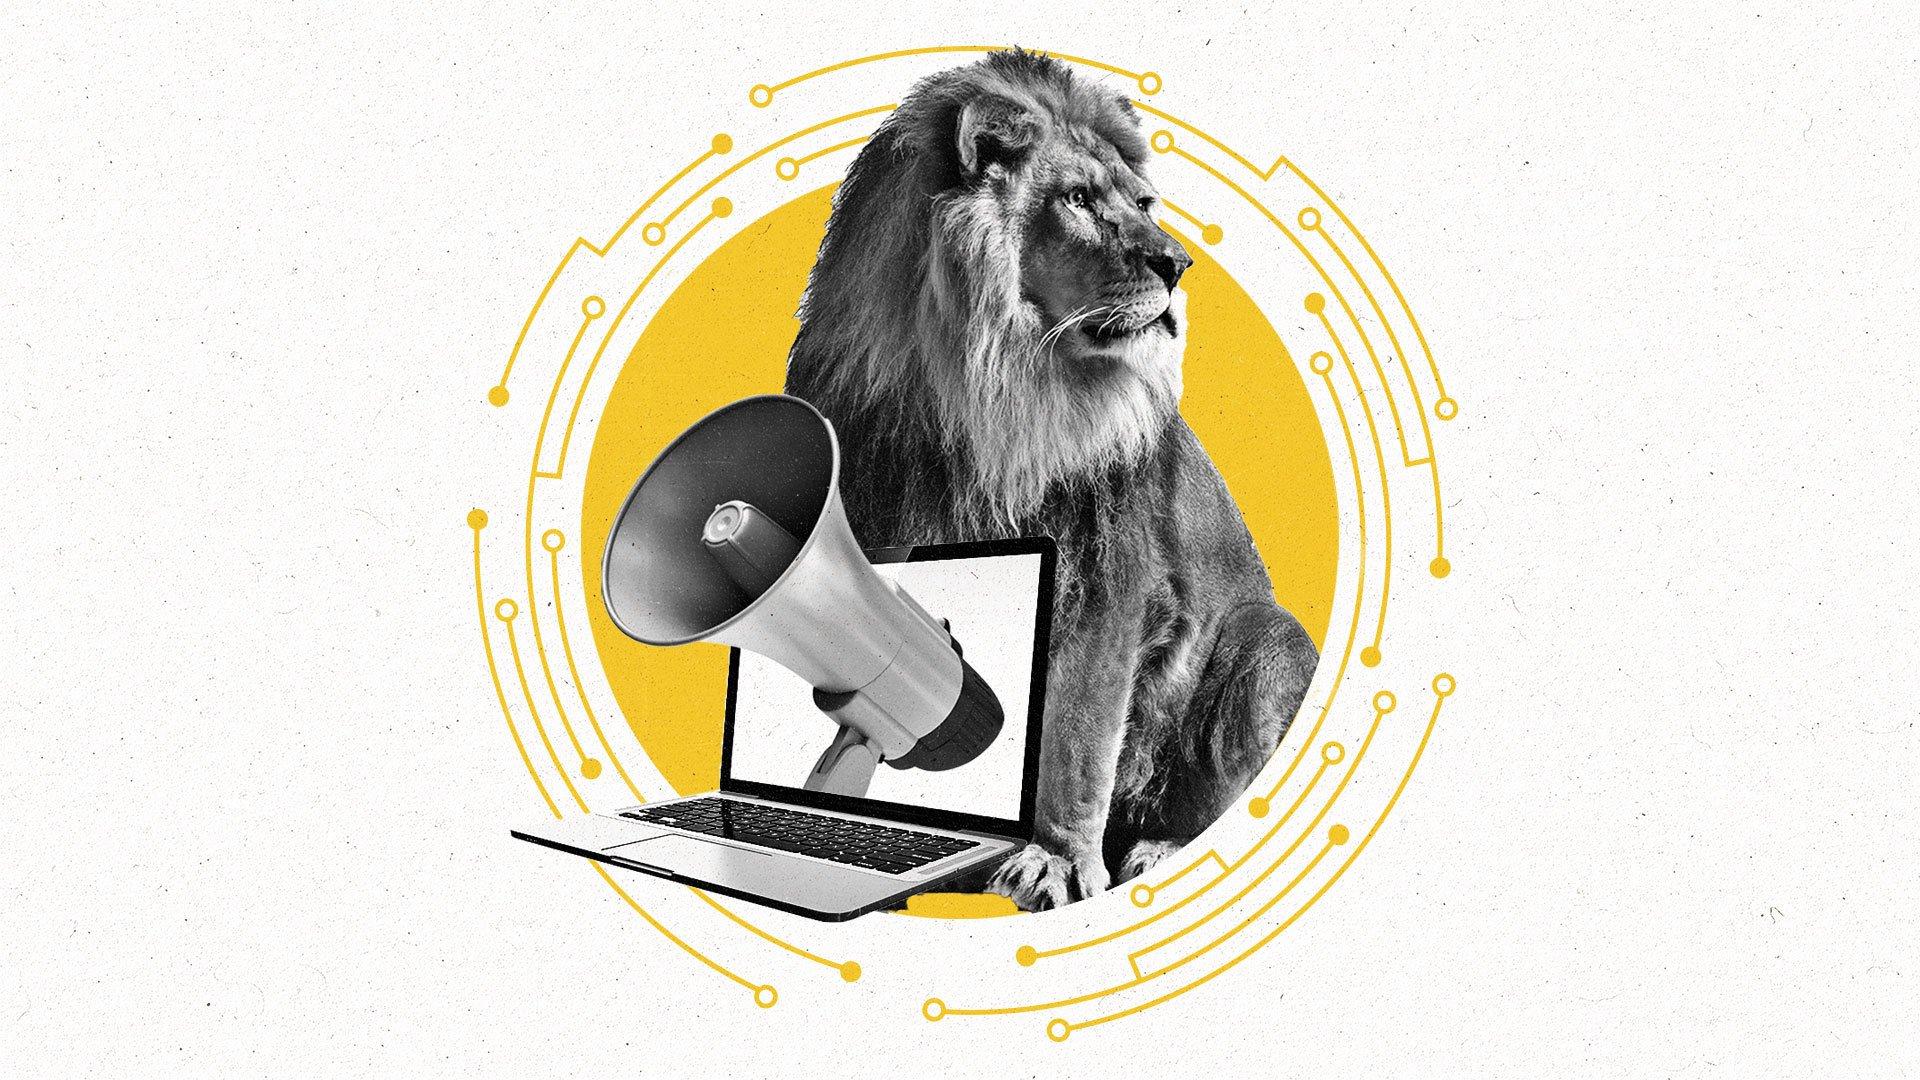 Alt text: Photo illustration of a lion next to a laptop with a megaphone coming out of its screen, within a yellow circle decorated by circuit imagery